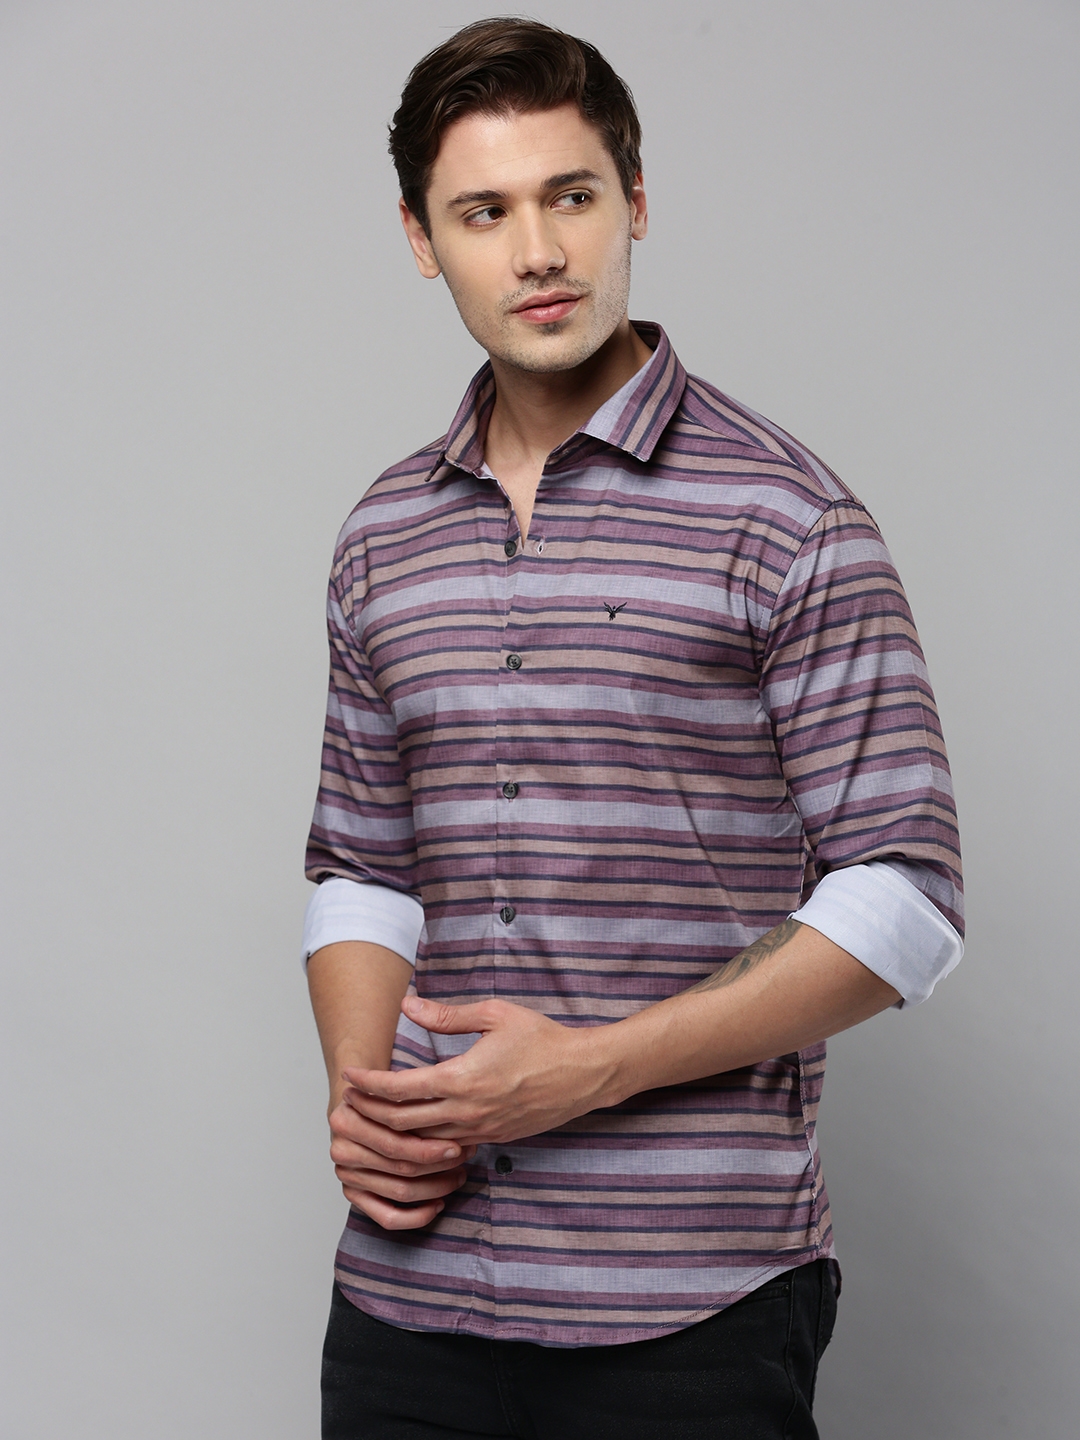 Showoff | SHOWOFF Men's Spread Collar Long Sleeves Striped Multi Shirt 2